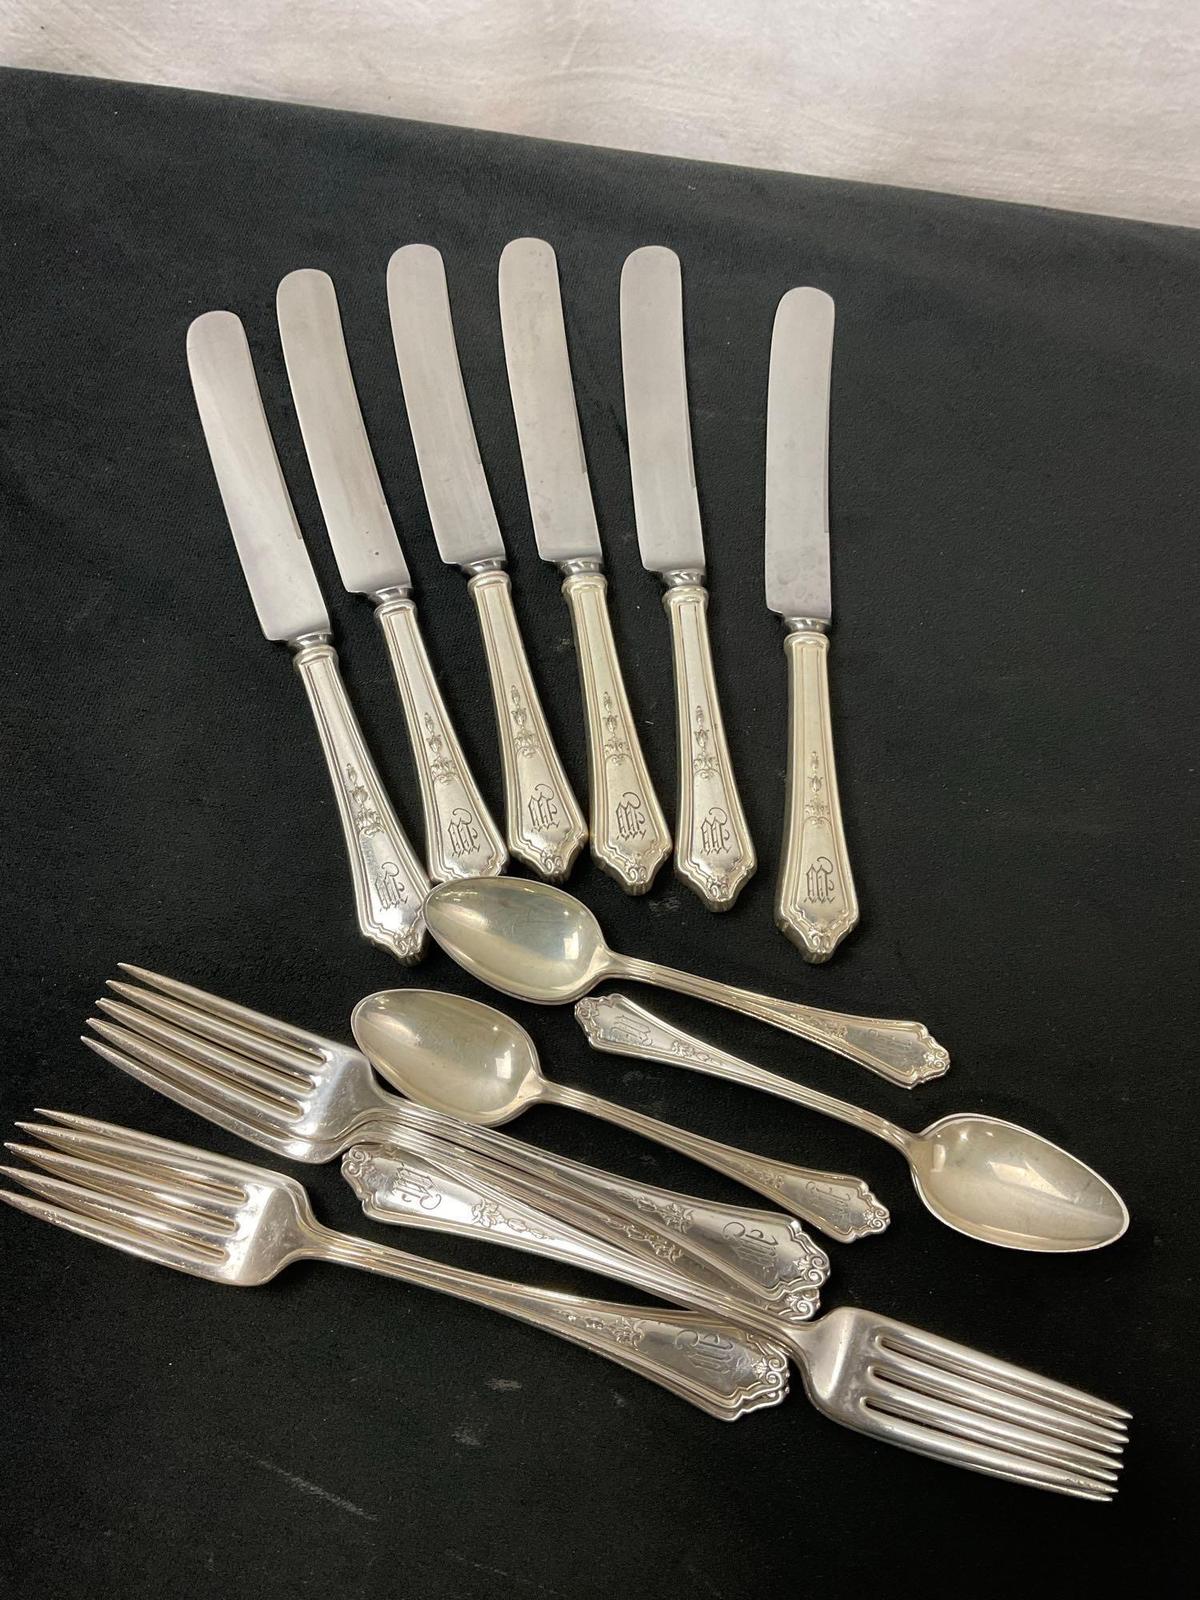 Antique Gorham Electro Plated Silverware, 18 pieces, Forks, Spoons, and Knifes w/ Stainless Blades